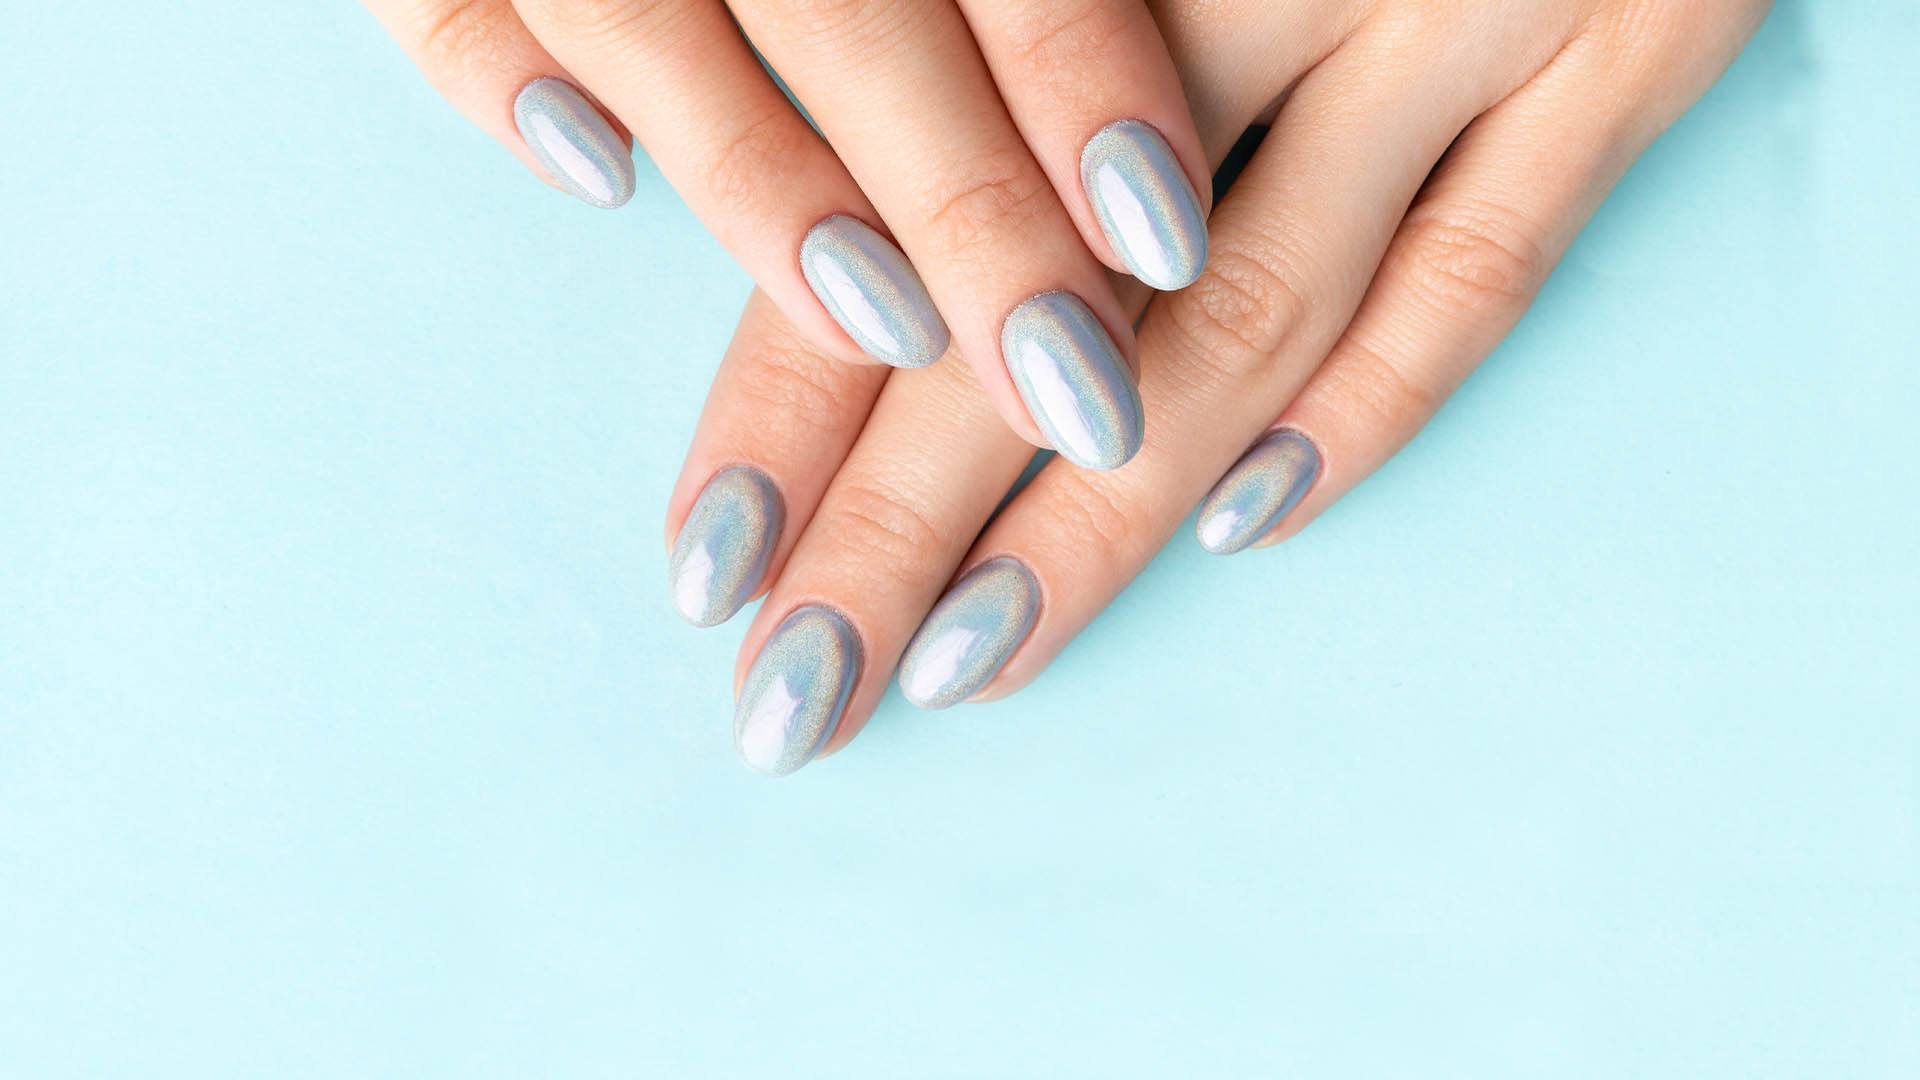 Loreal Paris Article Try Holographic Nails For An Out Of This World Mani D